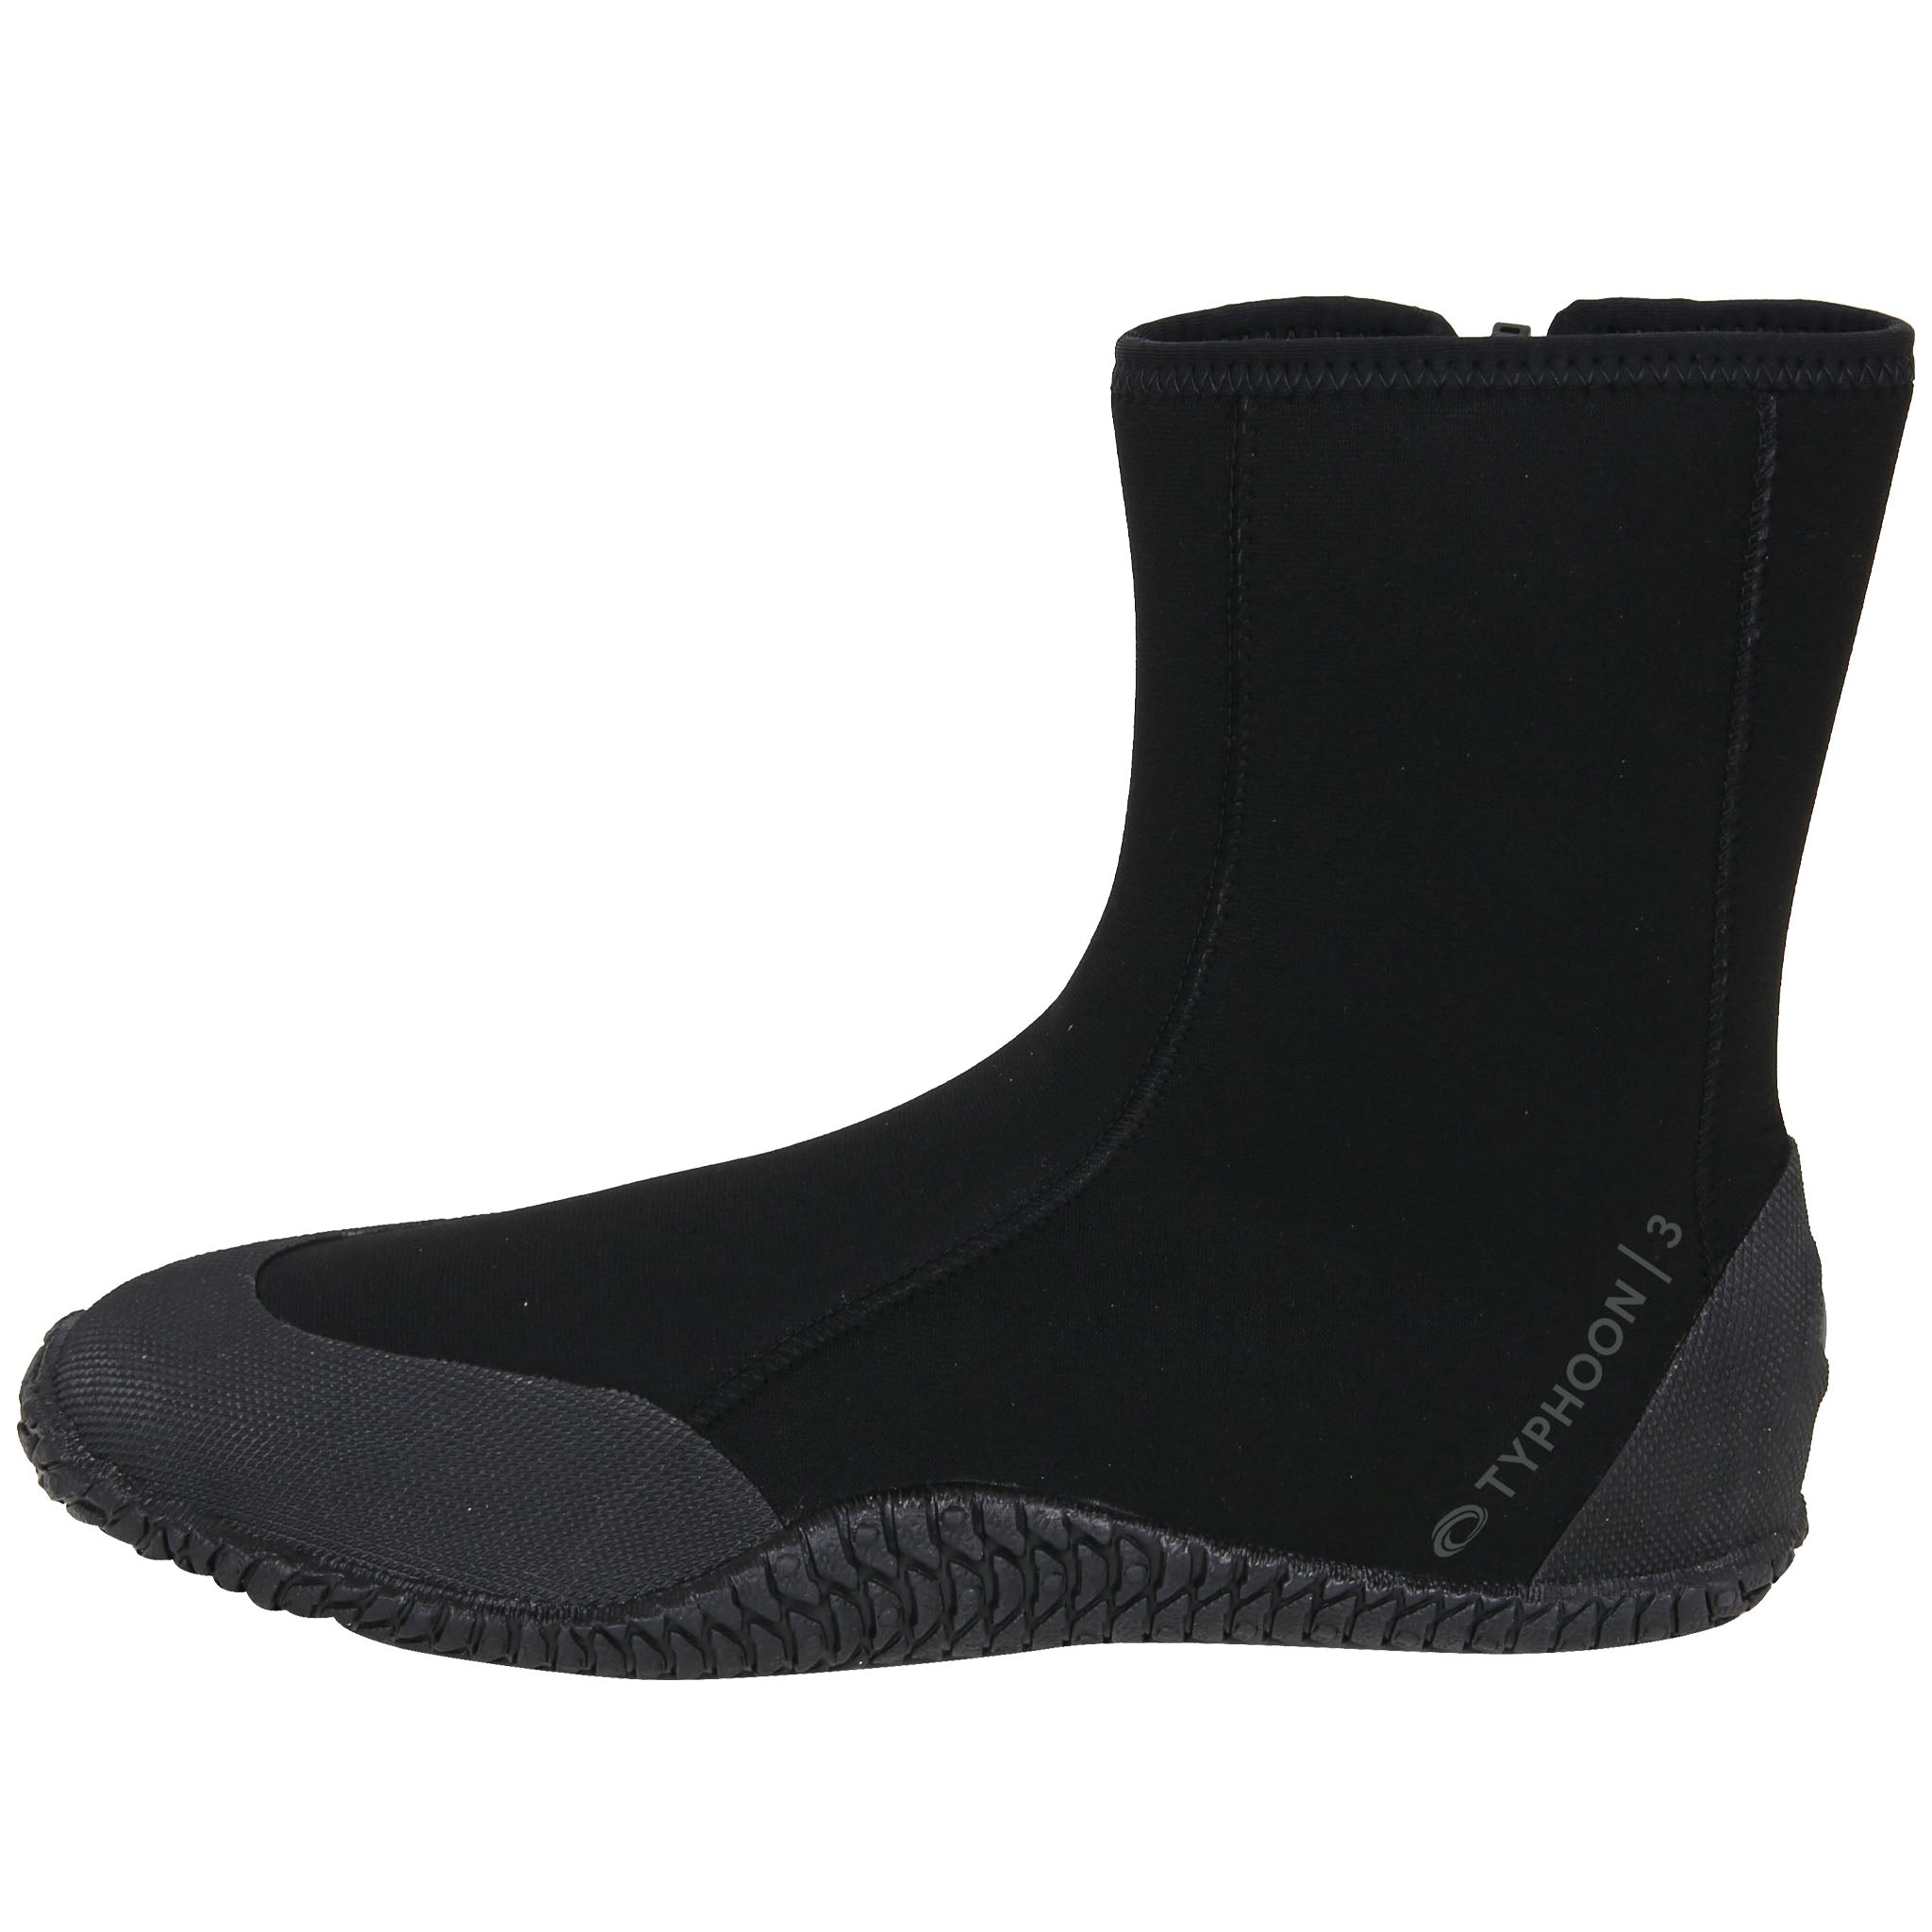 Typhoon Storm 3mm Zipped Junior Wetsuit Boots | Side